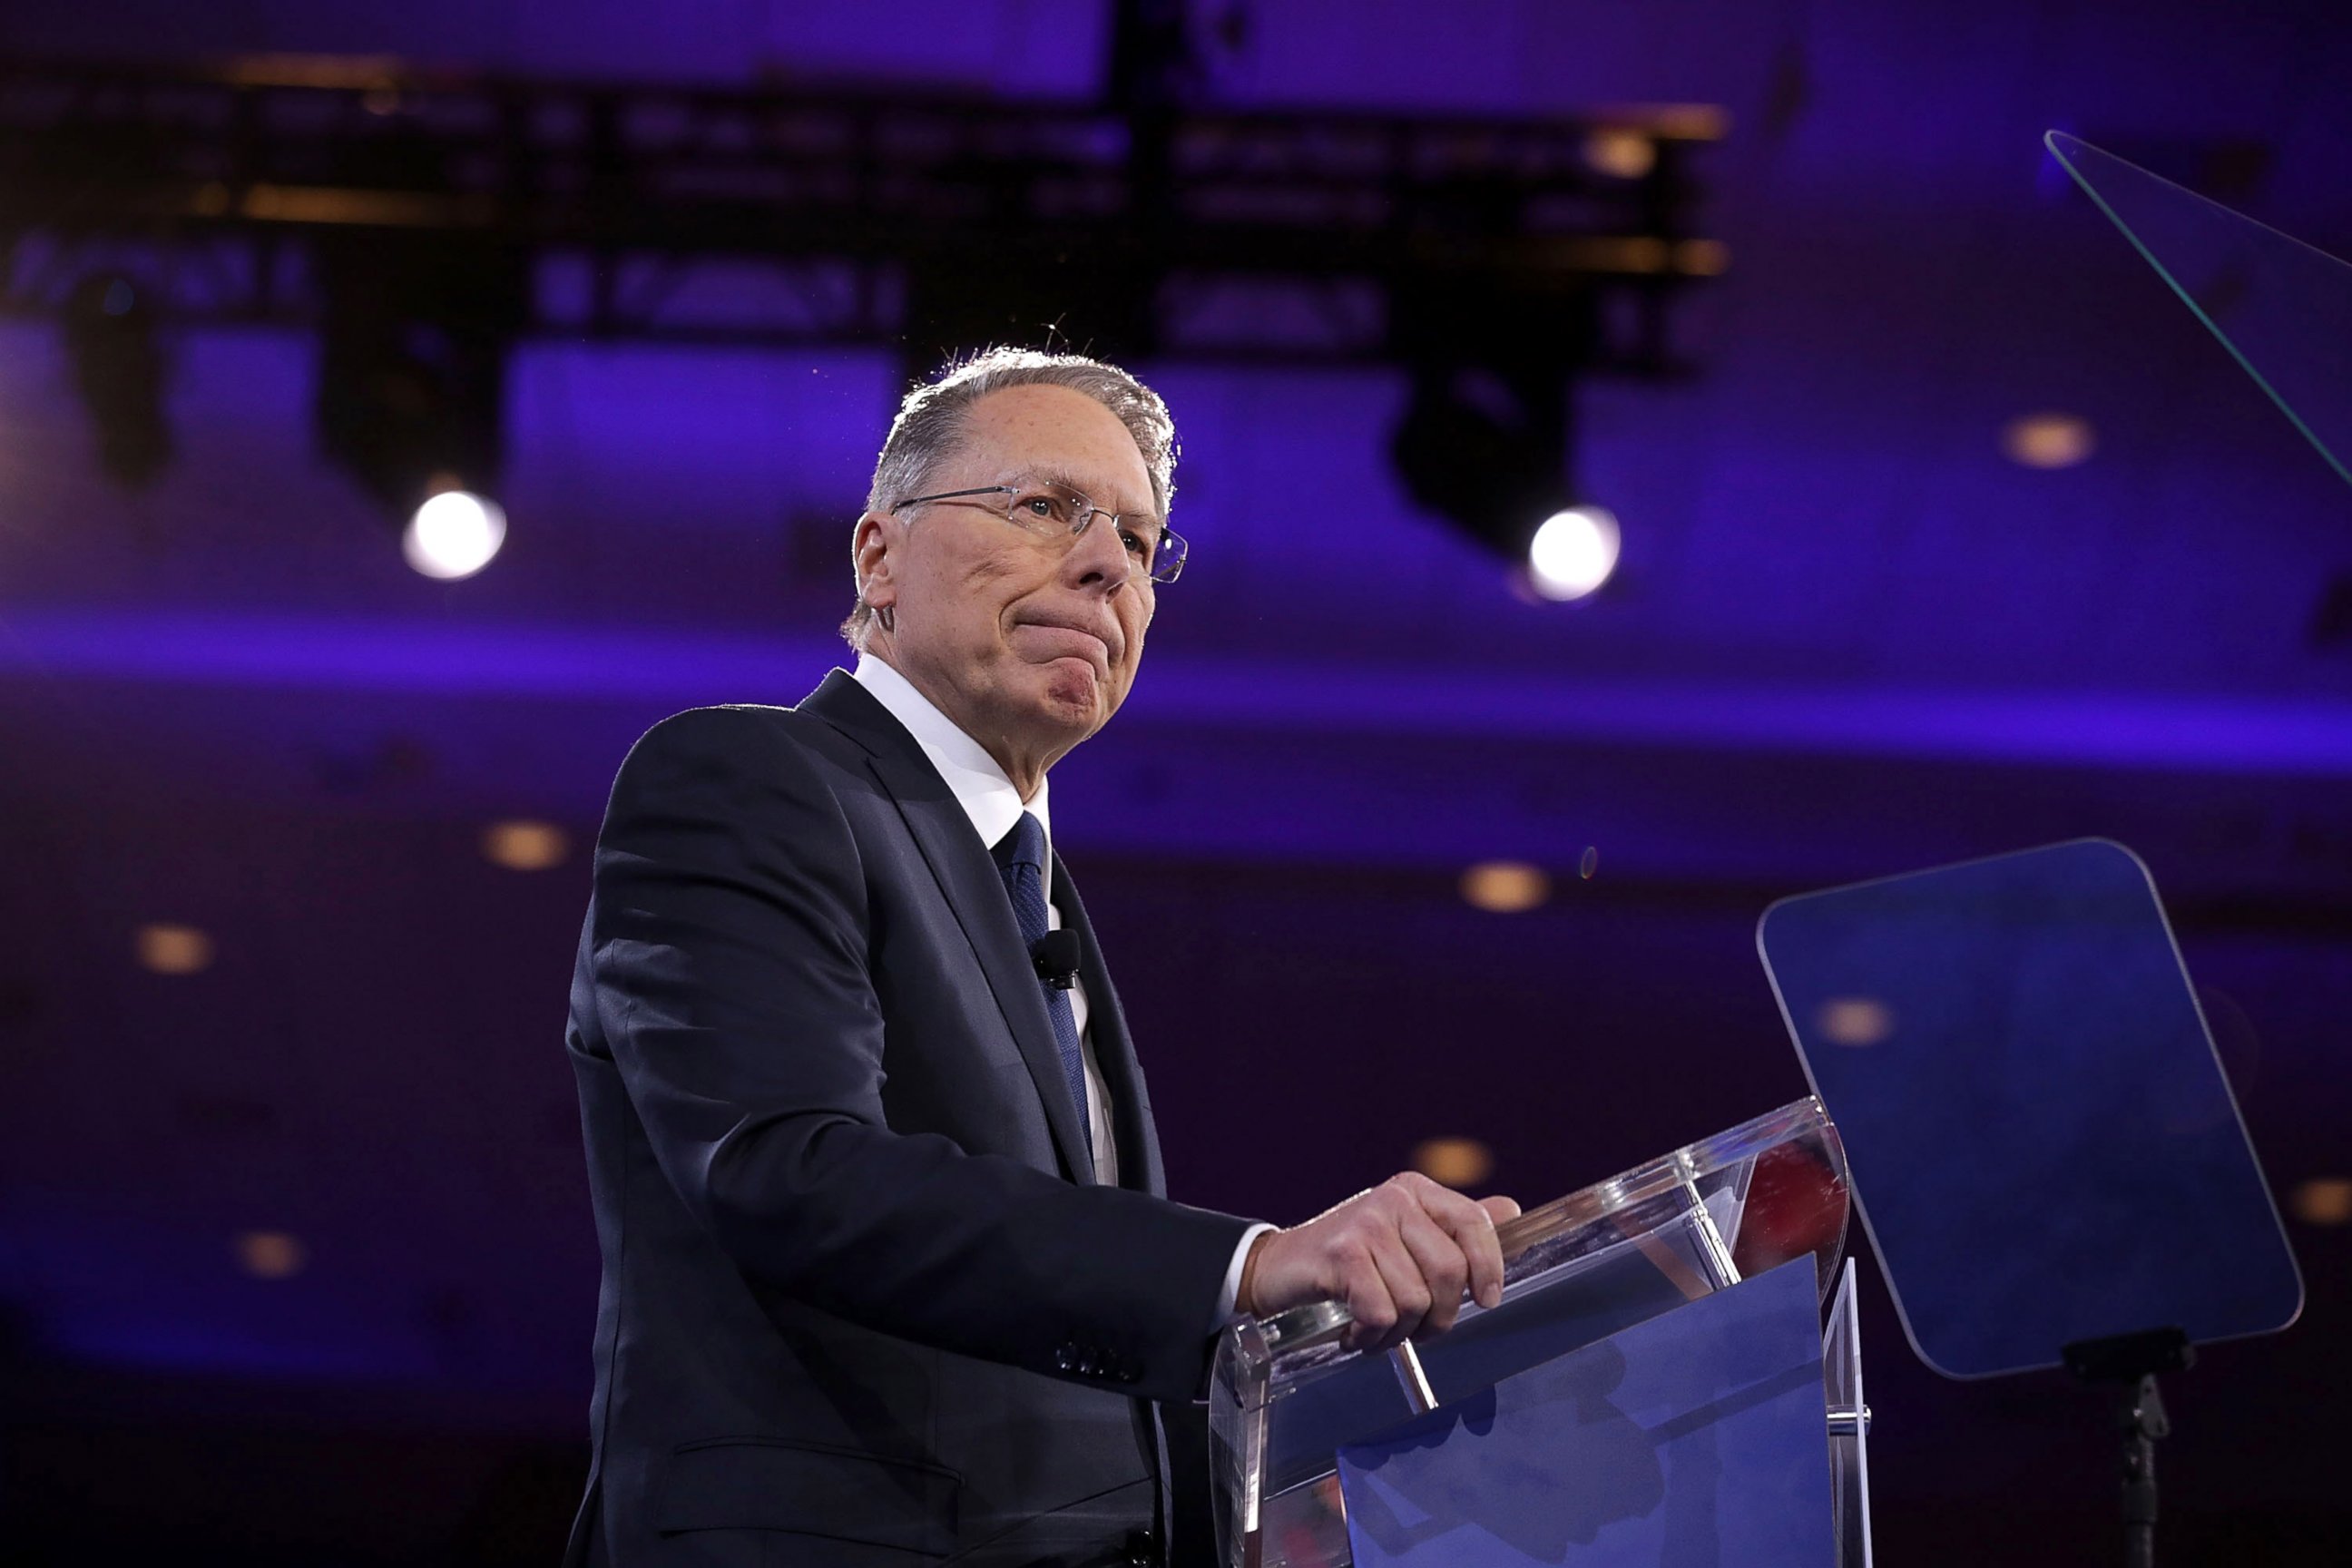 PHOTO: Executive Vice President of the National Rifle Association Wayne LaPierre speaks during the Conservative Political Action Conference (CPAC), March 3, 2016, in National Harbor, Md.